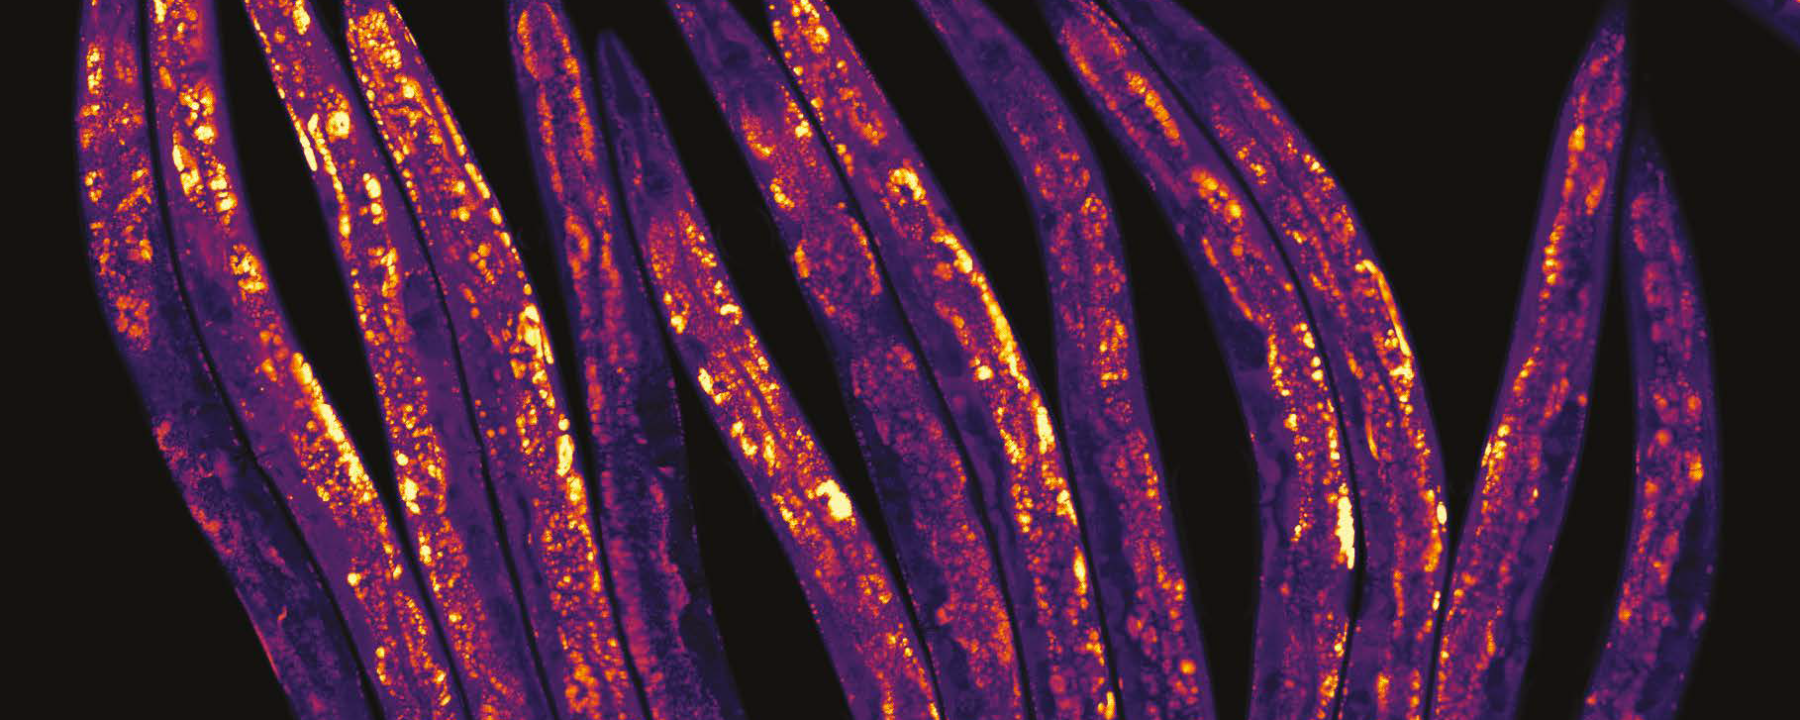 Stained C.elegans worms